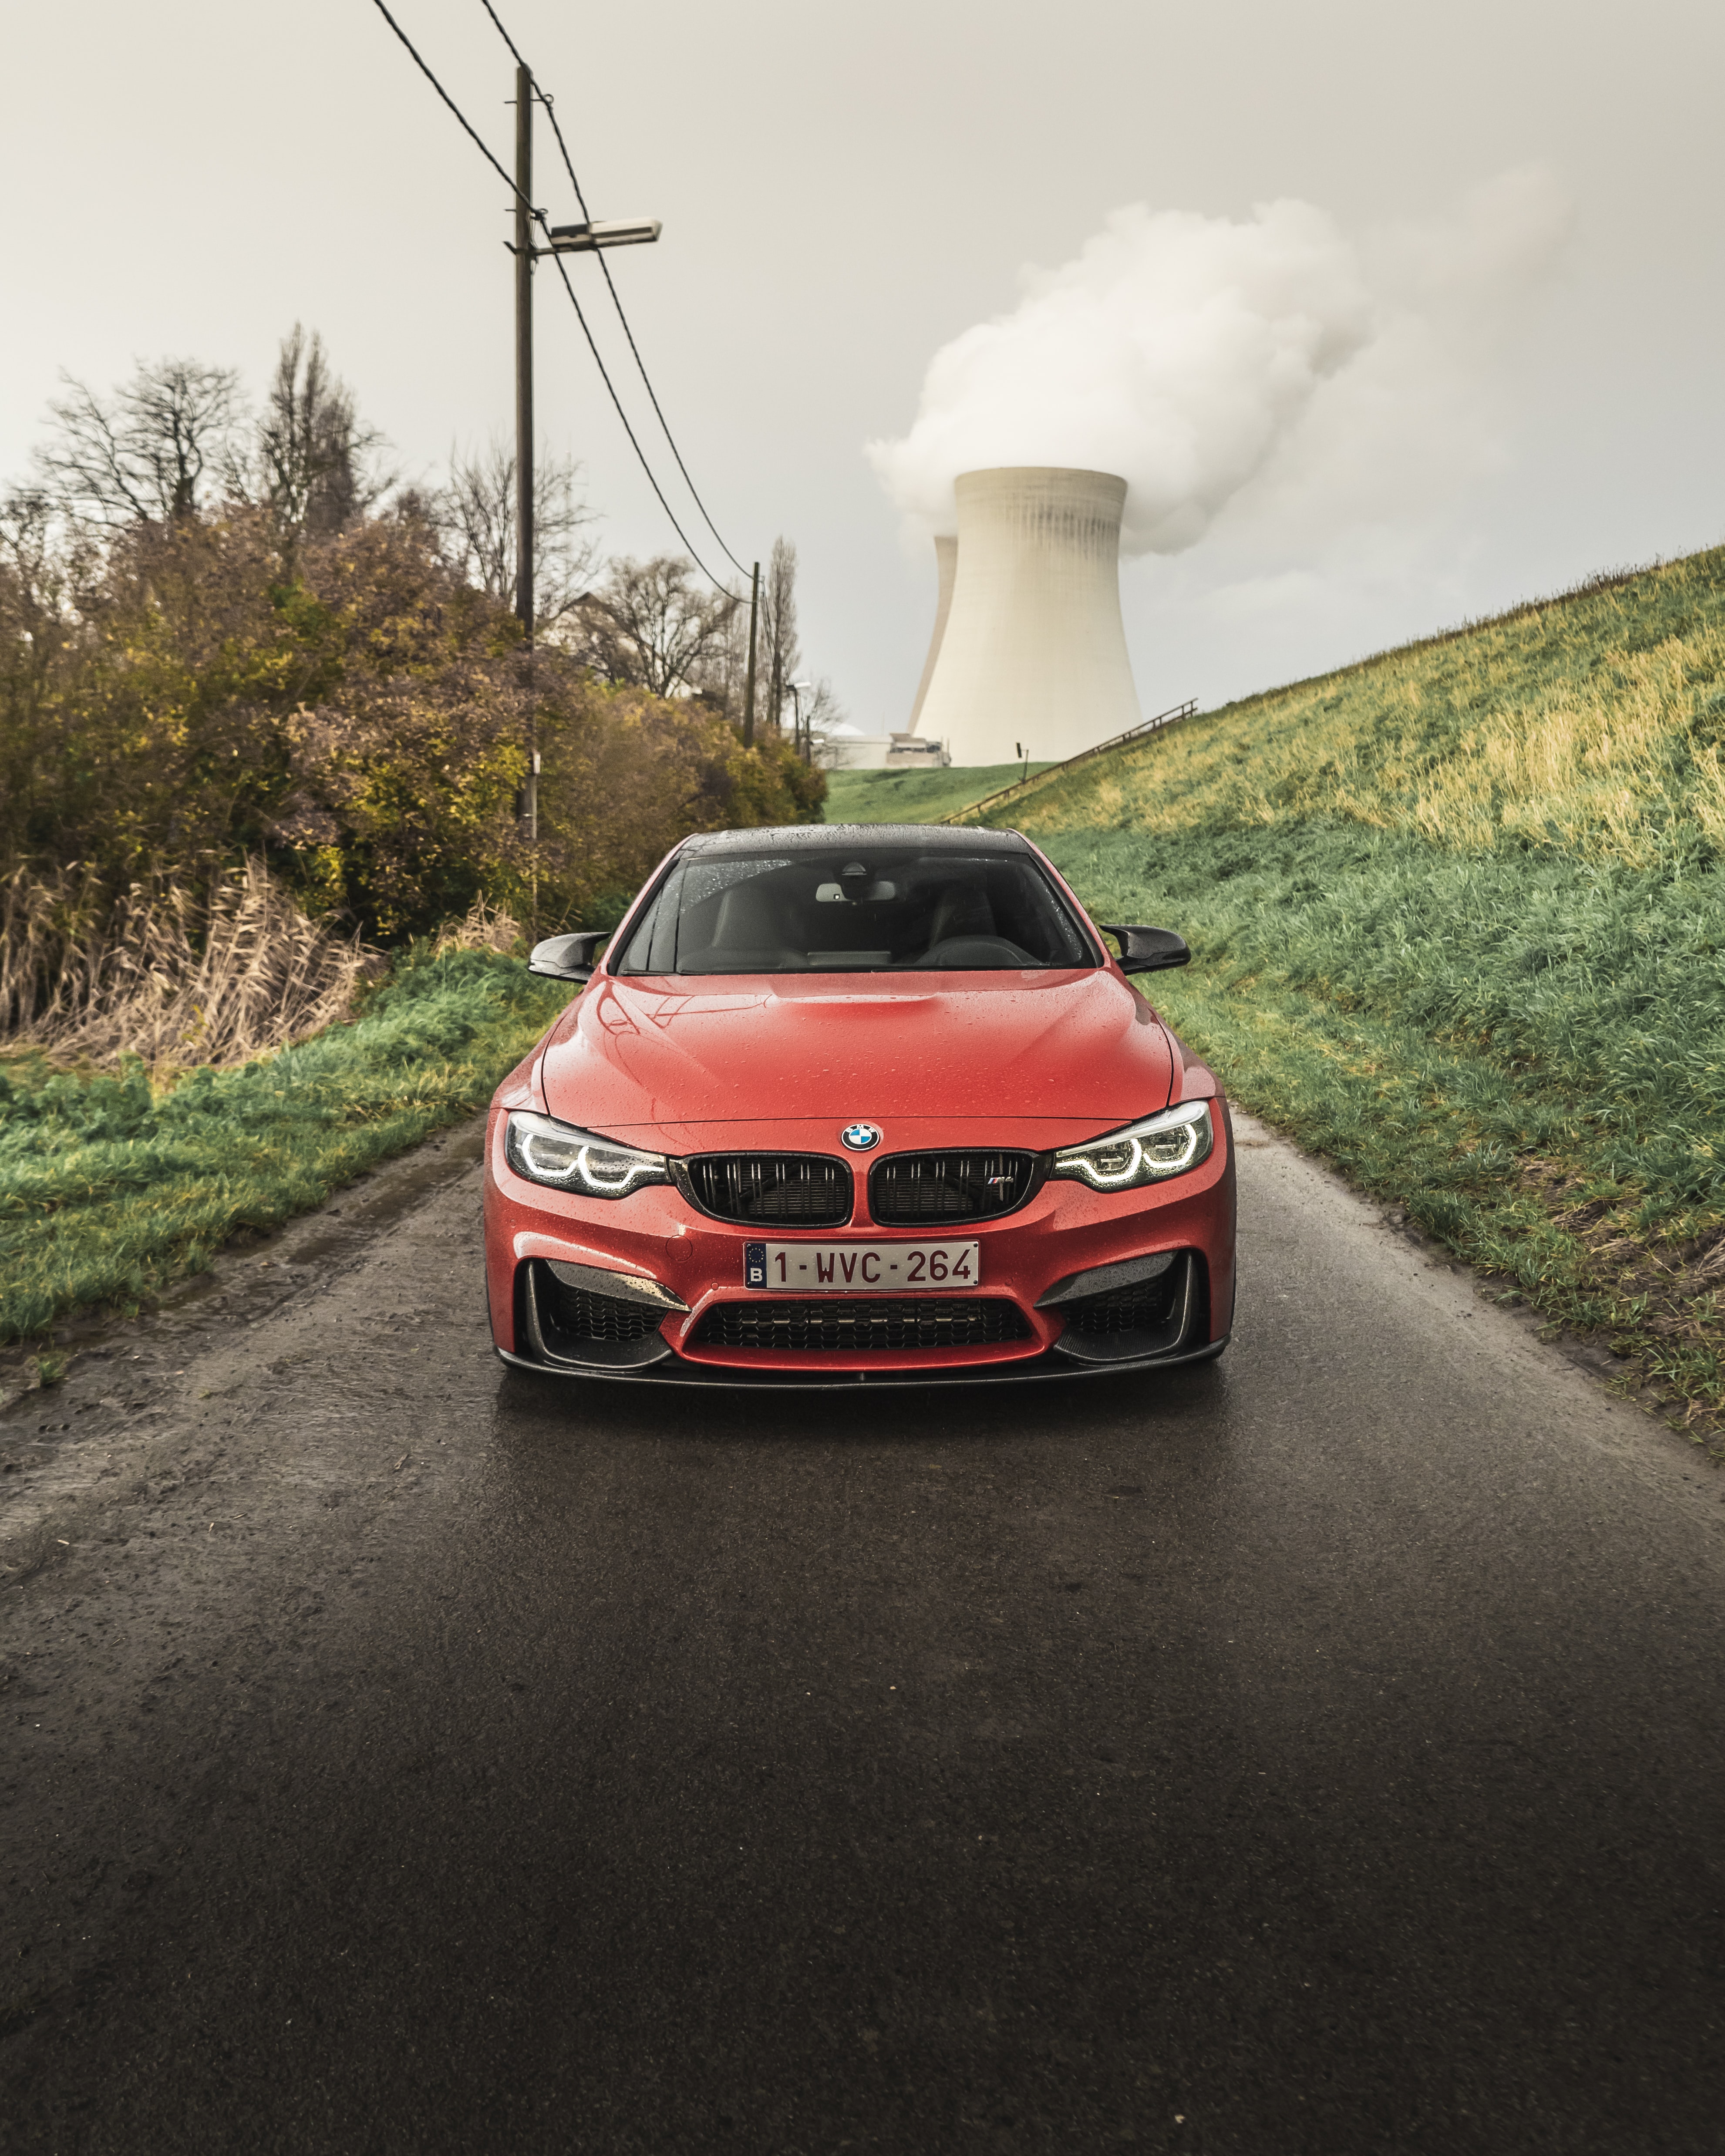 bmw, cars, red, car, front view, bmw m4